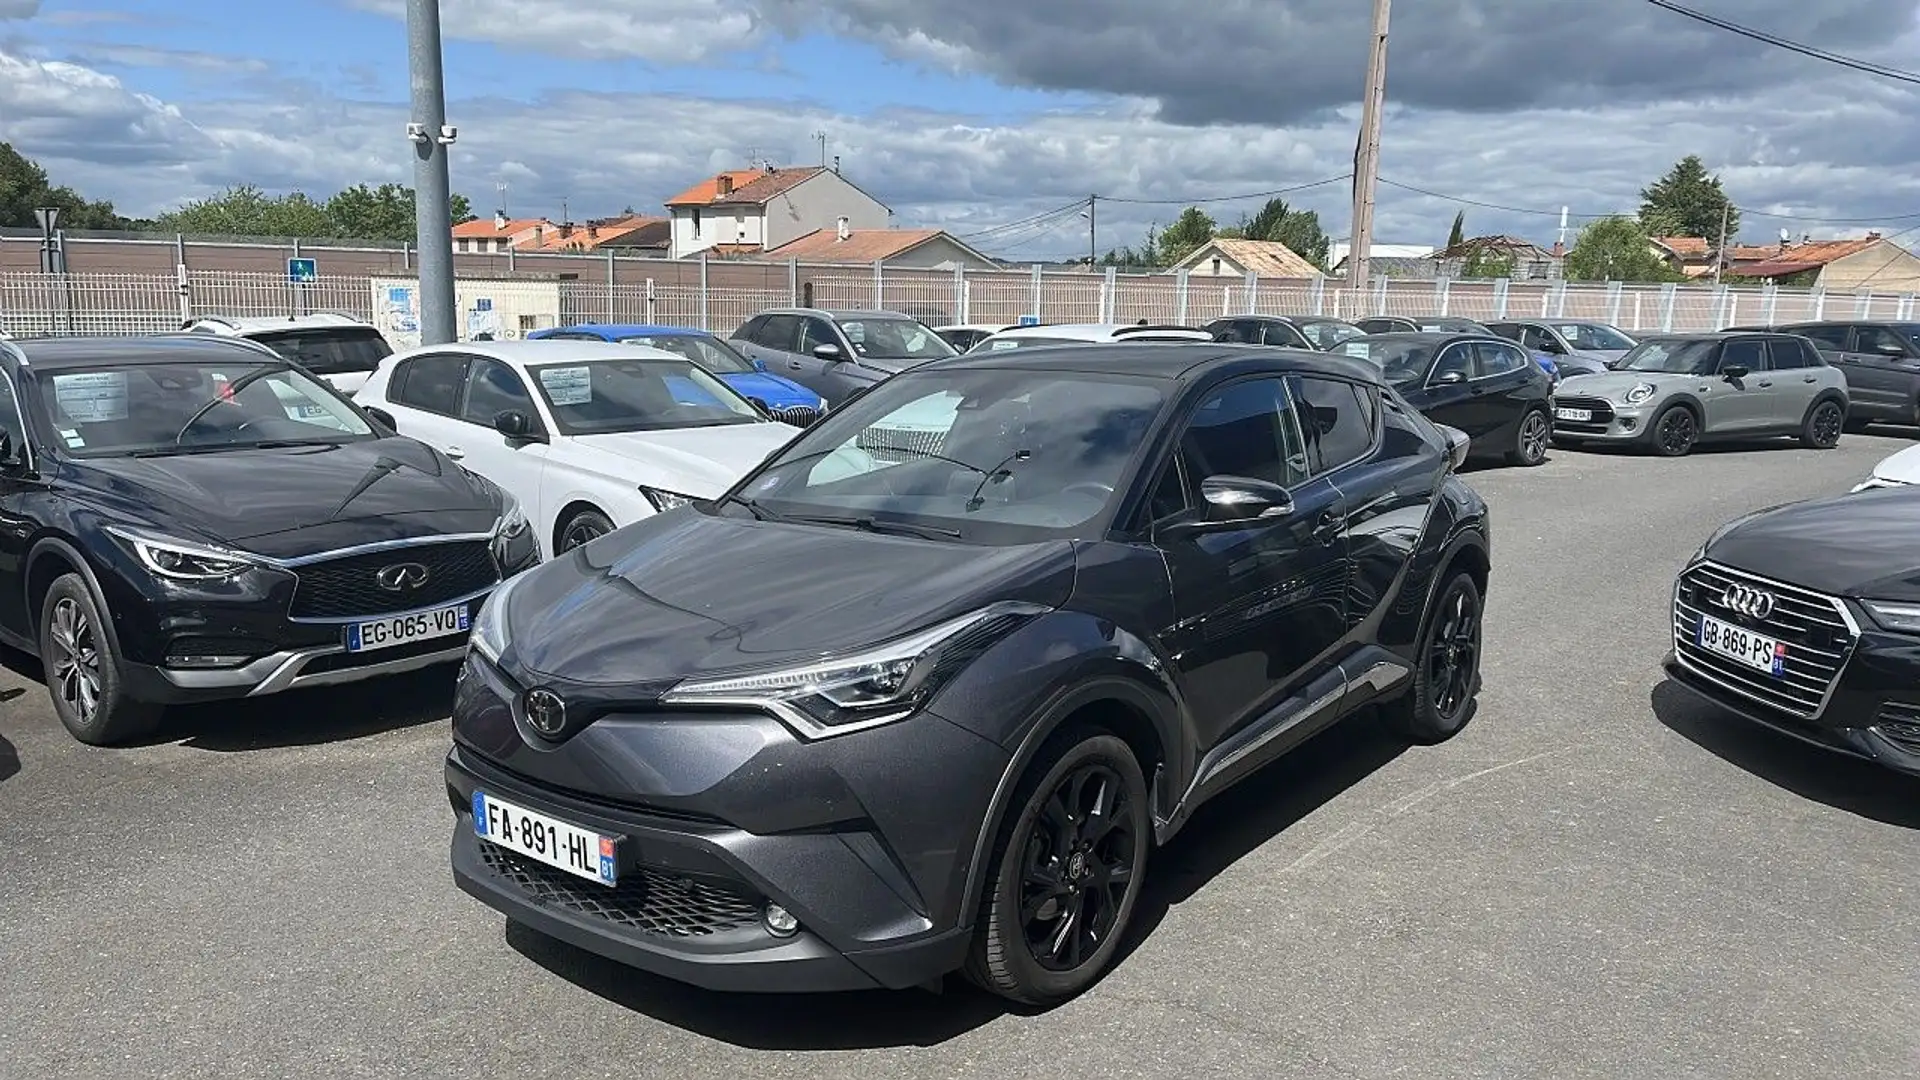 Toyota C-HR 1.2 TURBO 116CH GRAPHIC 2WD RC18 - 1